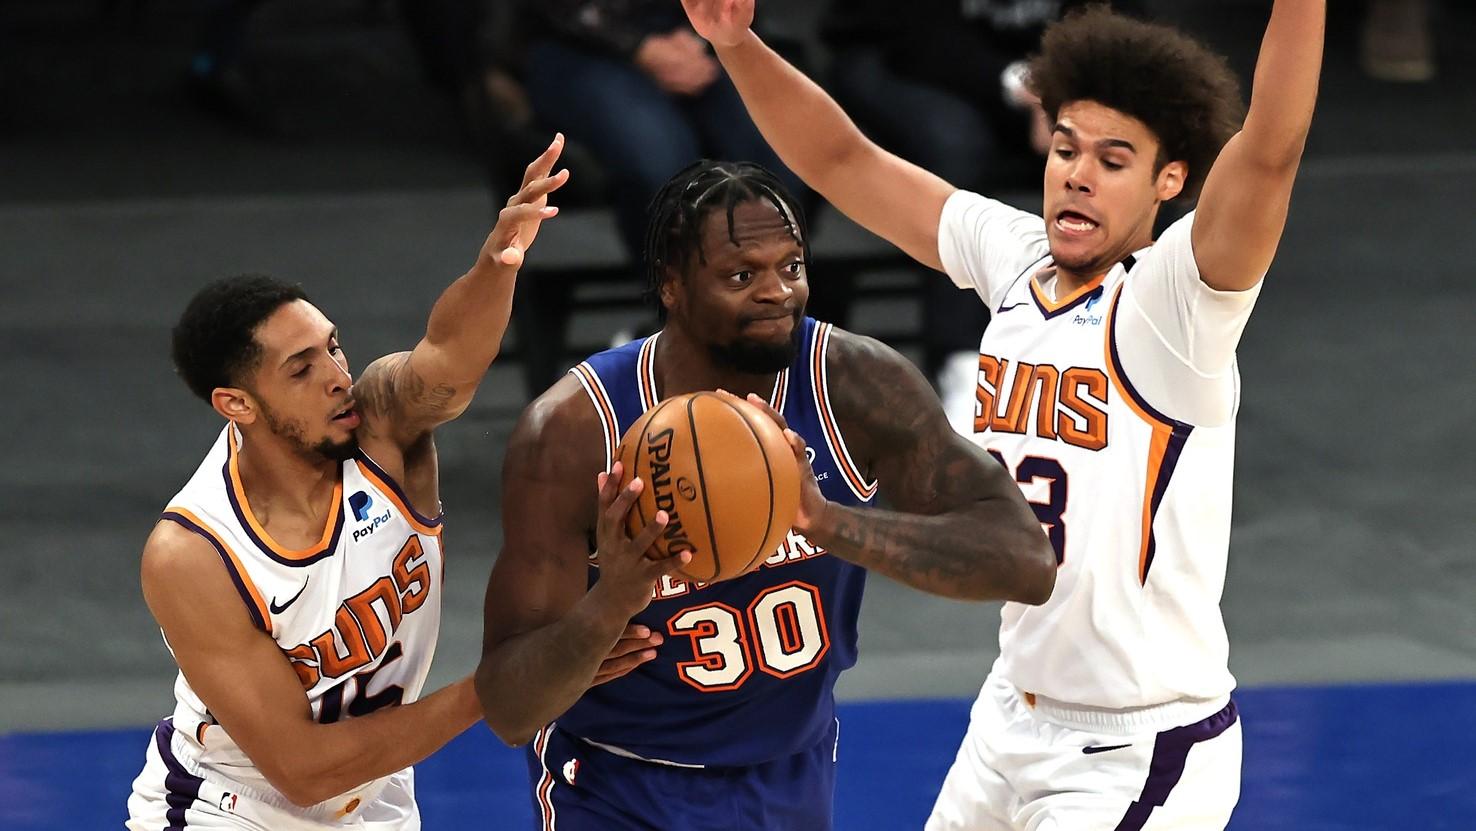 Apr 26, 2021; New York, New York, USA; Julius Randle #30 of the New York Knicks looks to pass as Cameron Payne #15 and Cameron Johnson #23 of the Phoenix Suns defend in the first half at Madison Square Garden. / Elsa/POOL PHOTOS-USA TODAY Sports